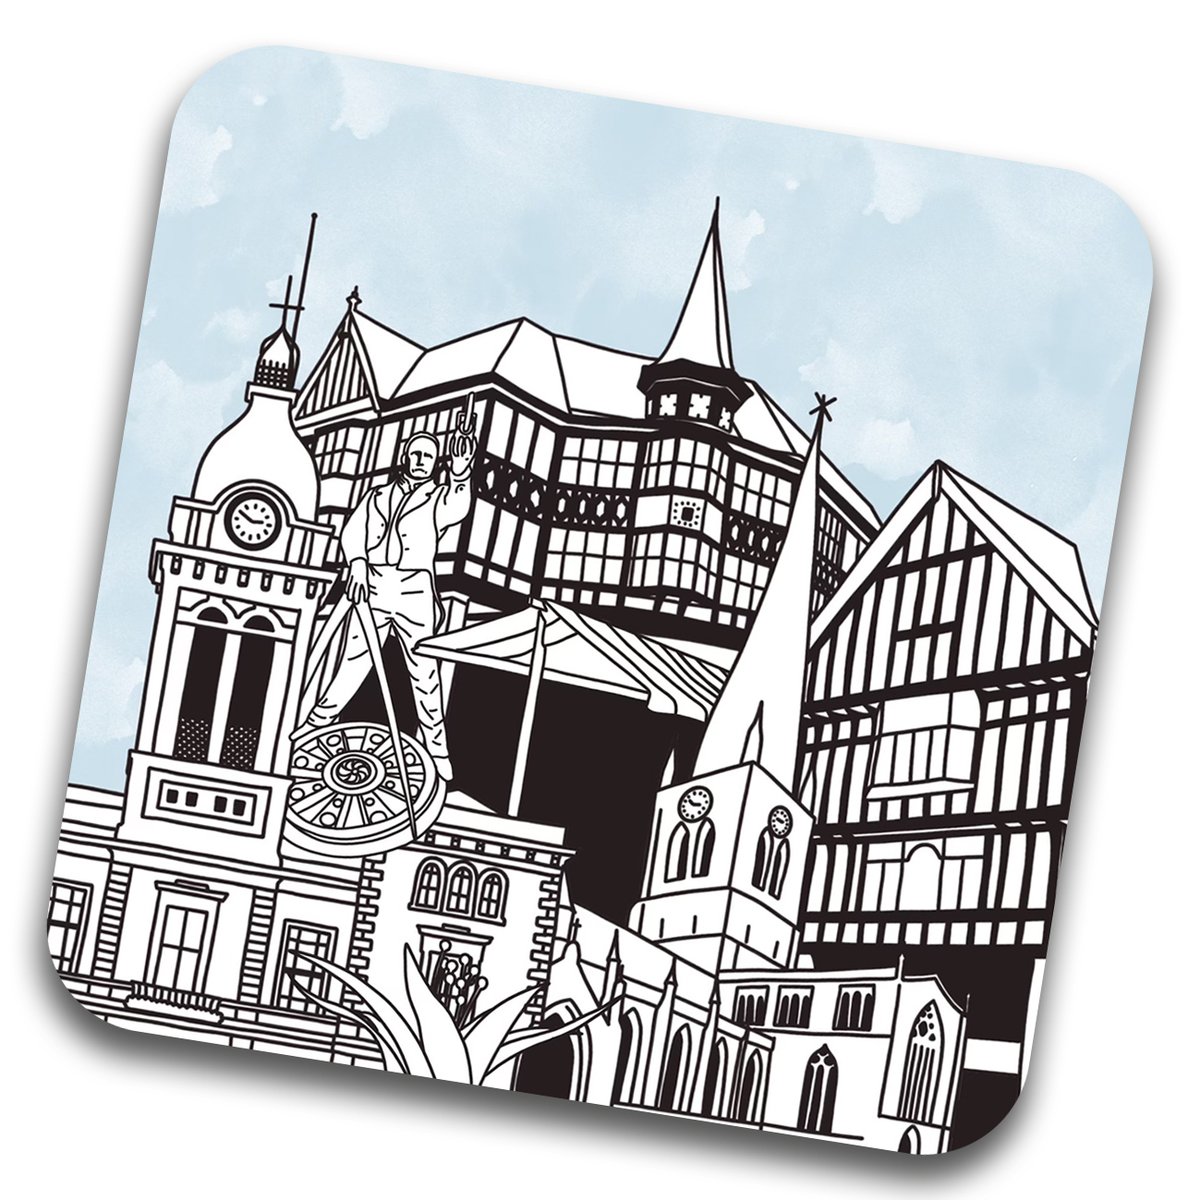 Latest addition to our Etsy shop...Landmarks of Chesterfield 95mm Square Cork Backed Coaster, from an original unique composite illustration by our friends at Lanky Moose Designs. 
etsy.com/.../landmarks-…...
#supportlocal #chesterfield #chesterfielduk #originalart #printedgifts